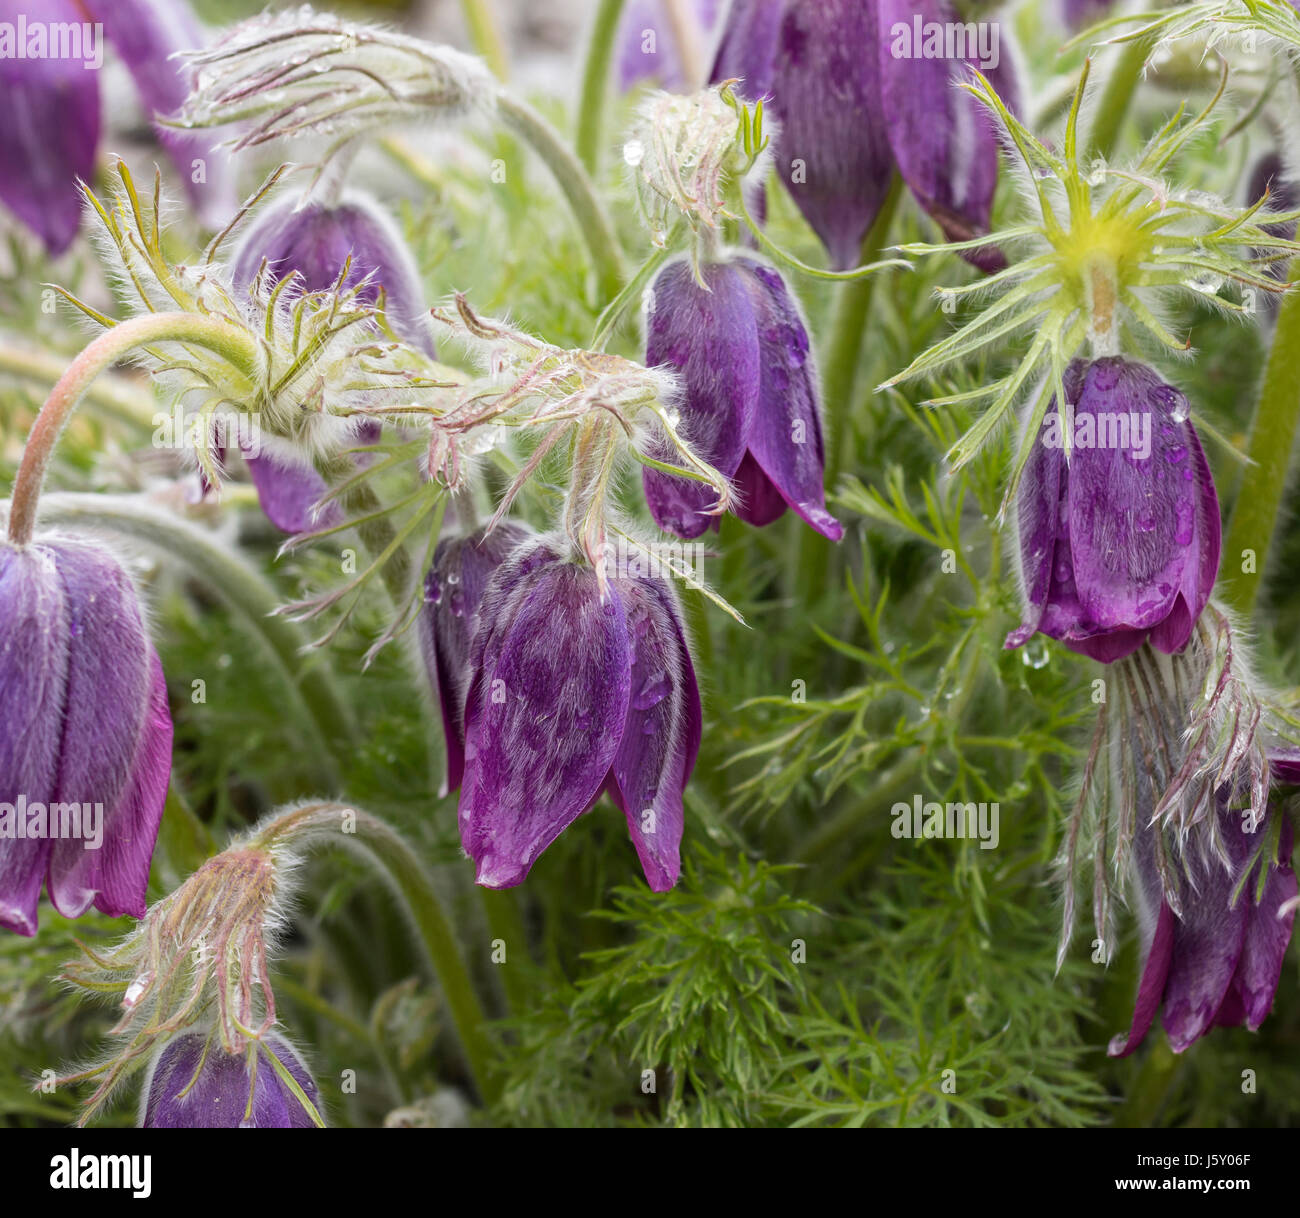 Pasque flower, Pulsatilla vulgaris, Group of purple flowers grbowing outdoor. Stock Photo